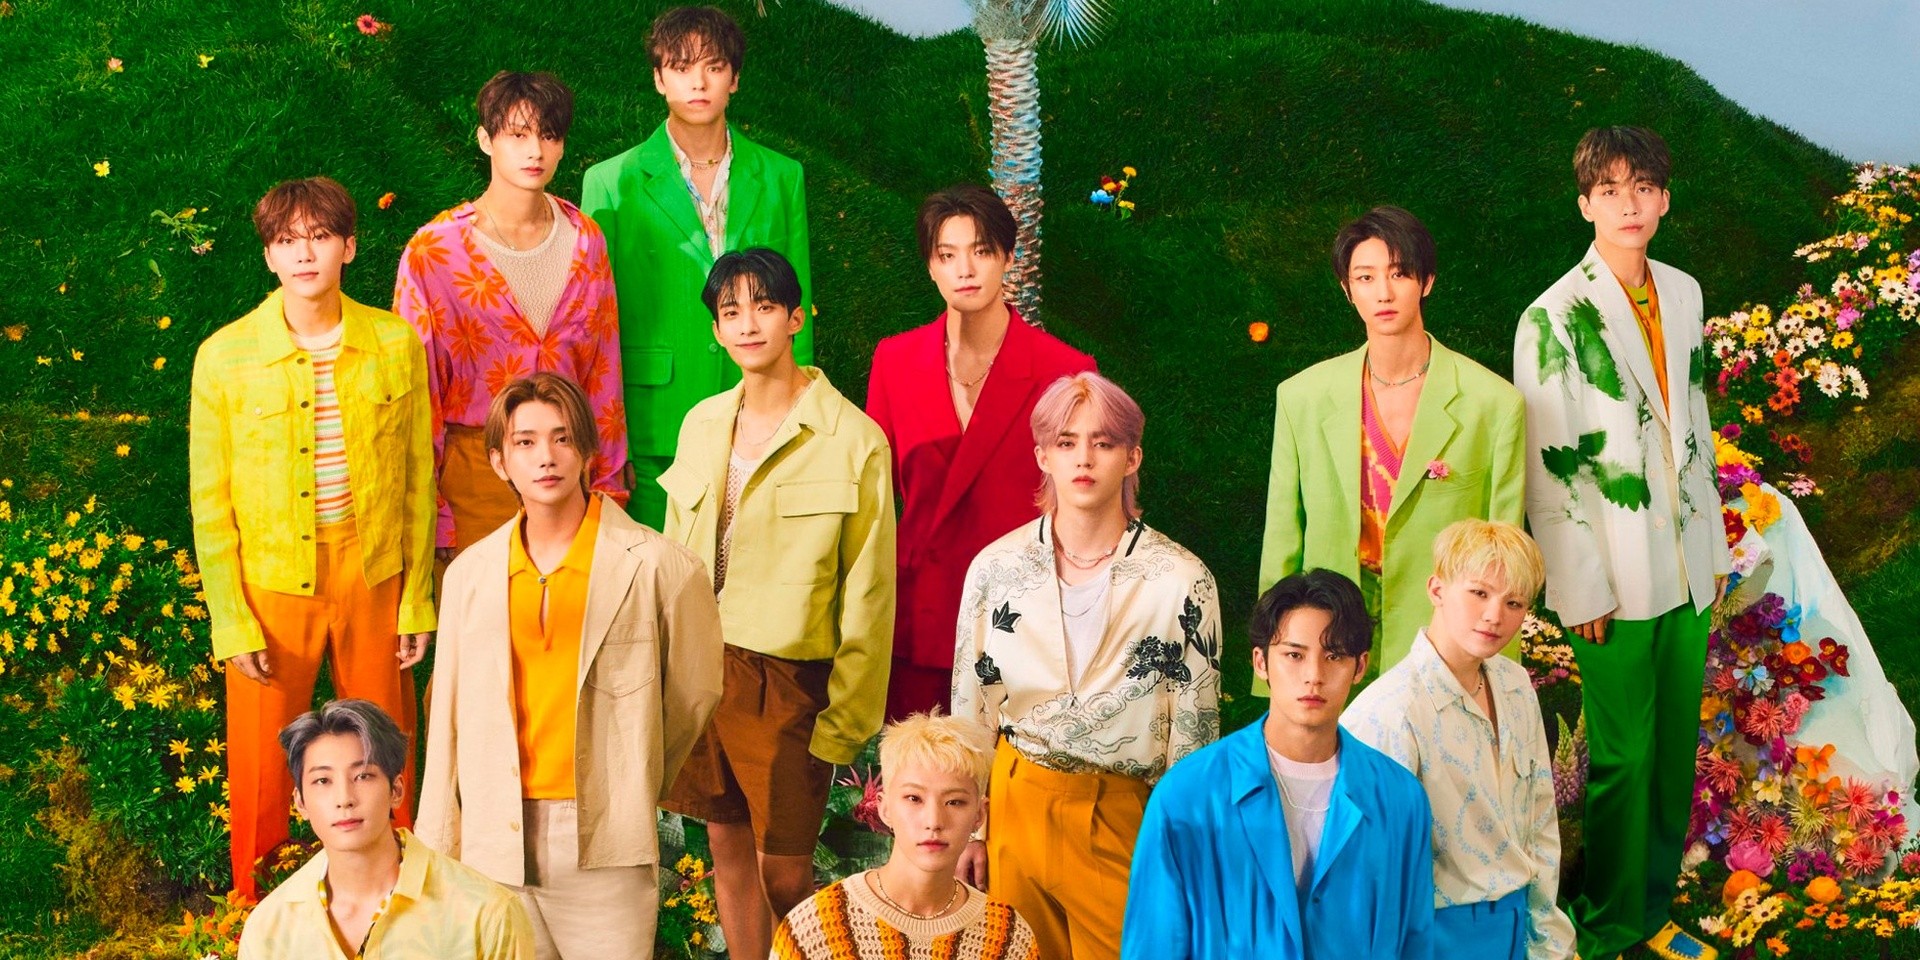 Here's everything you need to know about SEVENTEEN's concert in Manila this October